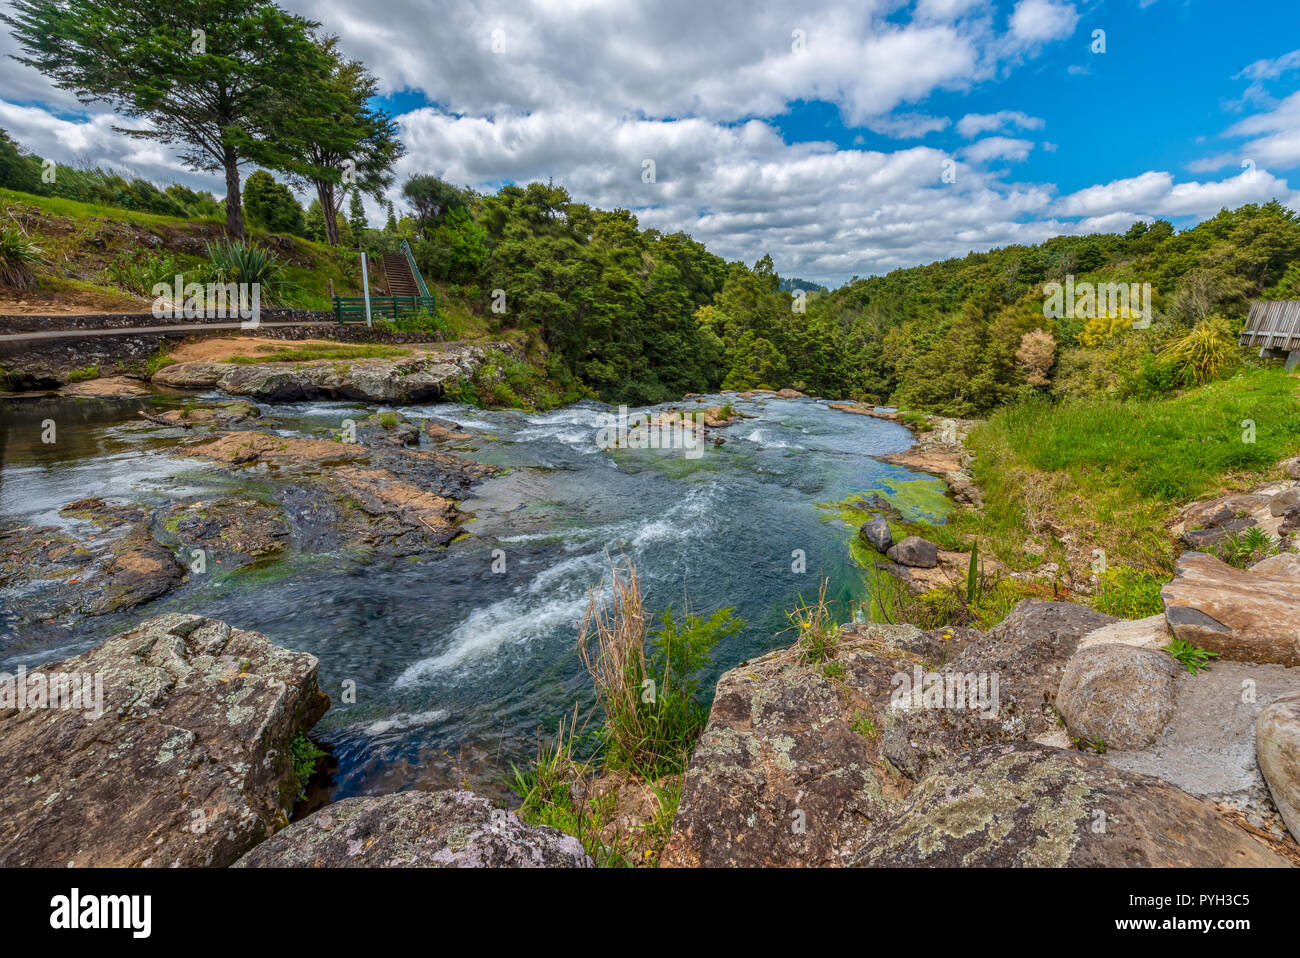 Scenic reserve surrounding the Hatea River in Whangerei New Zealand on a bright sunny day with blue skies and clouds Stock Photo